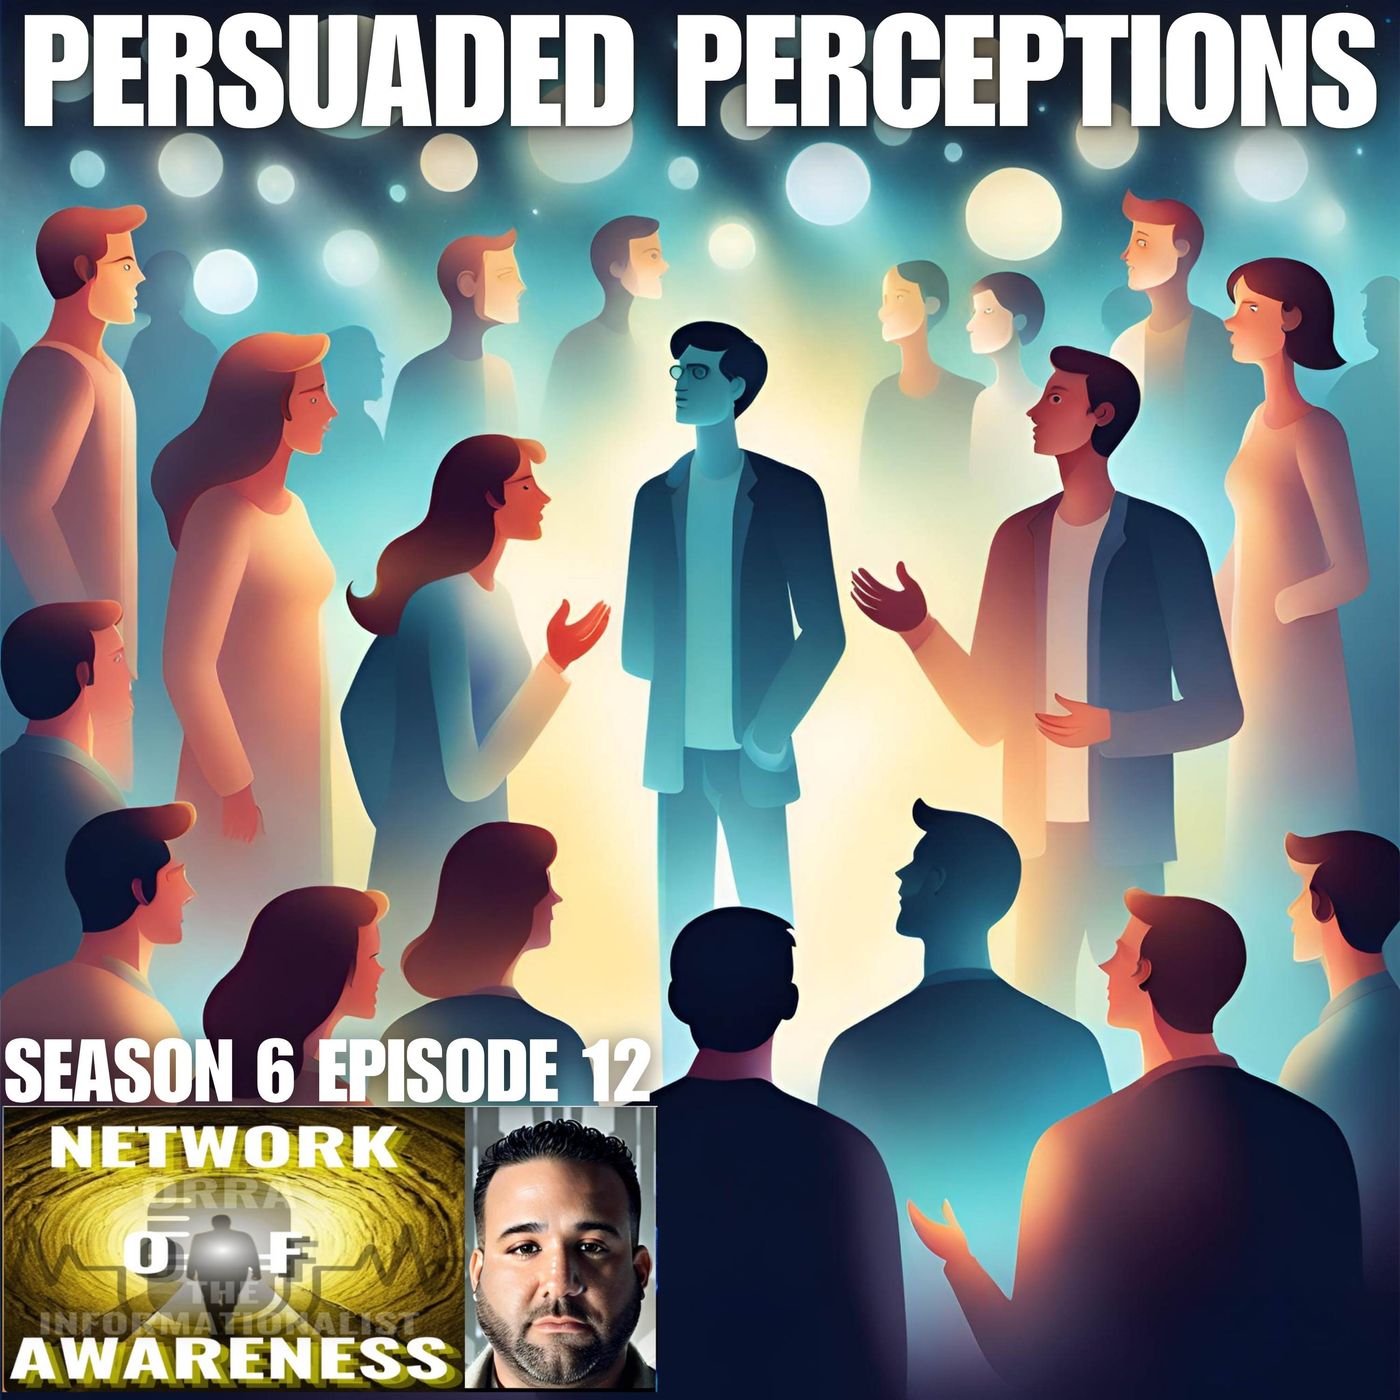 "PERSUADED PERCEPTIONS" Part 1